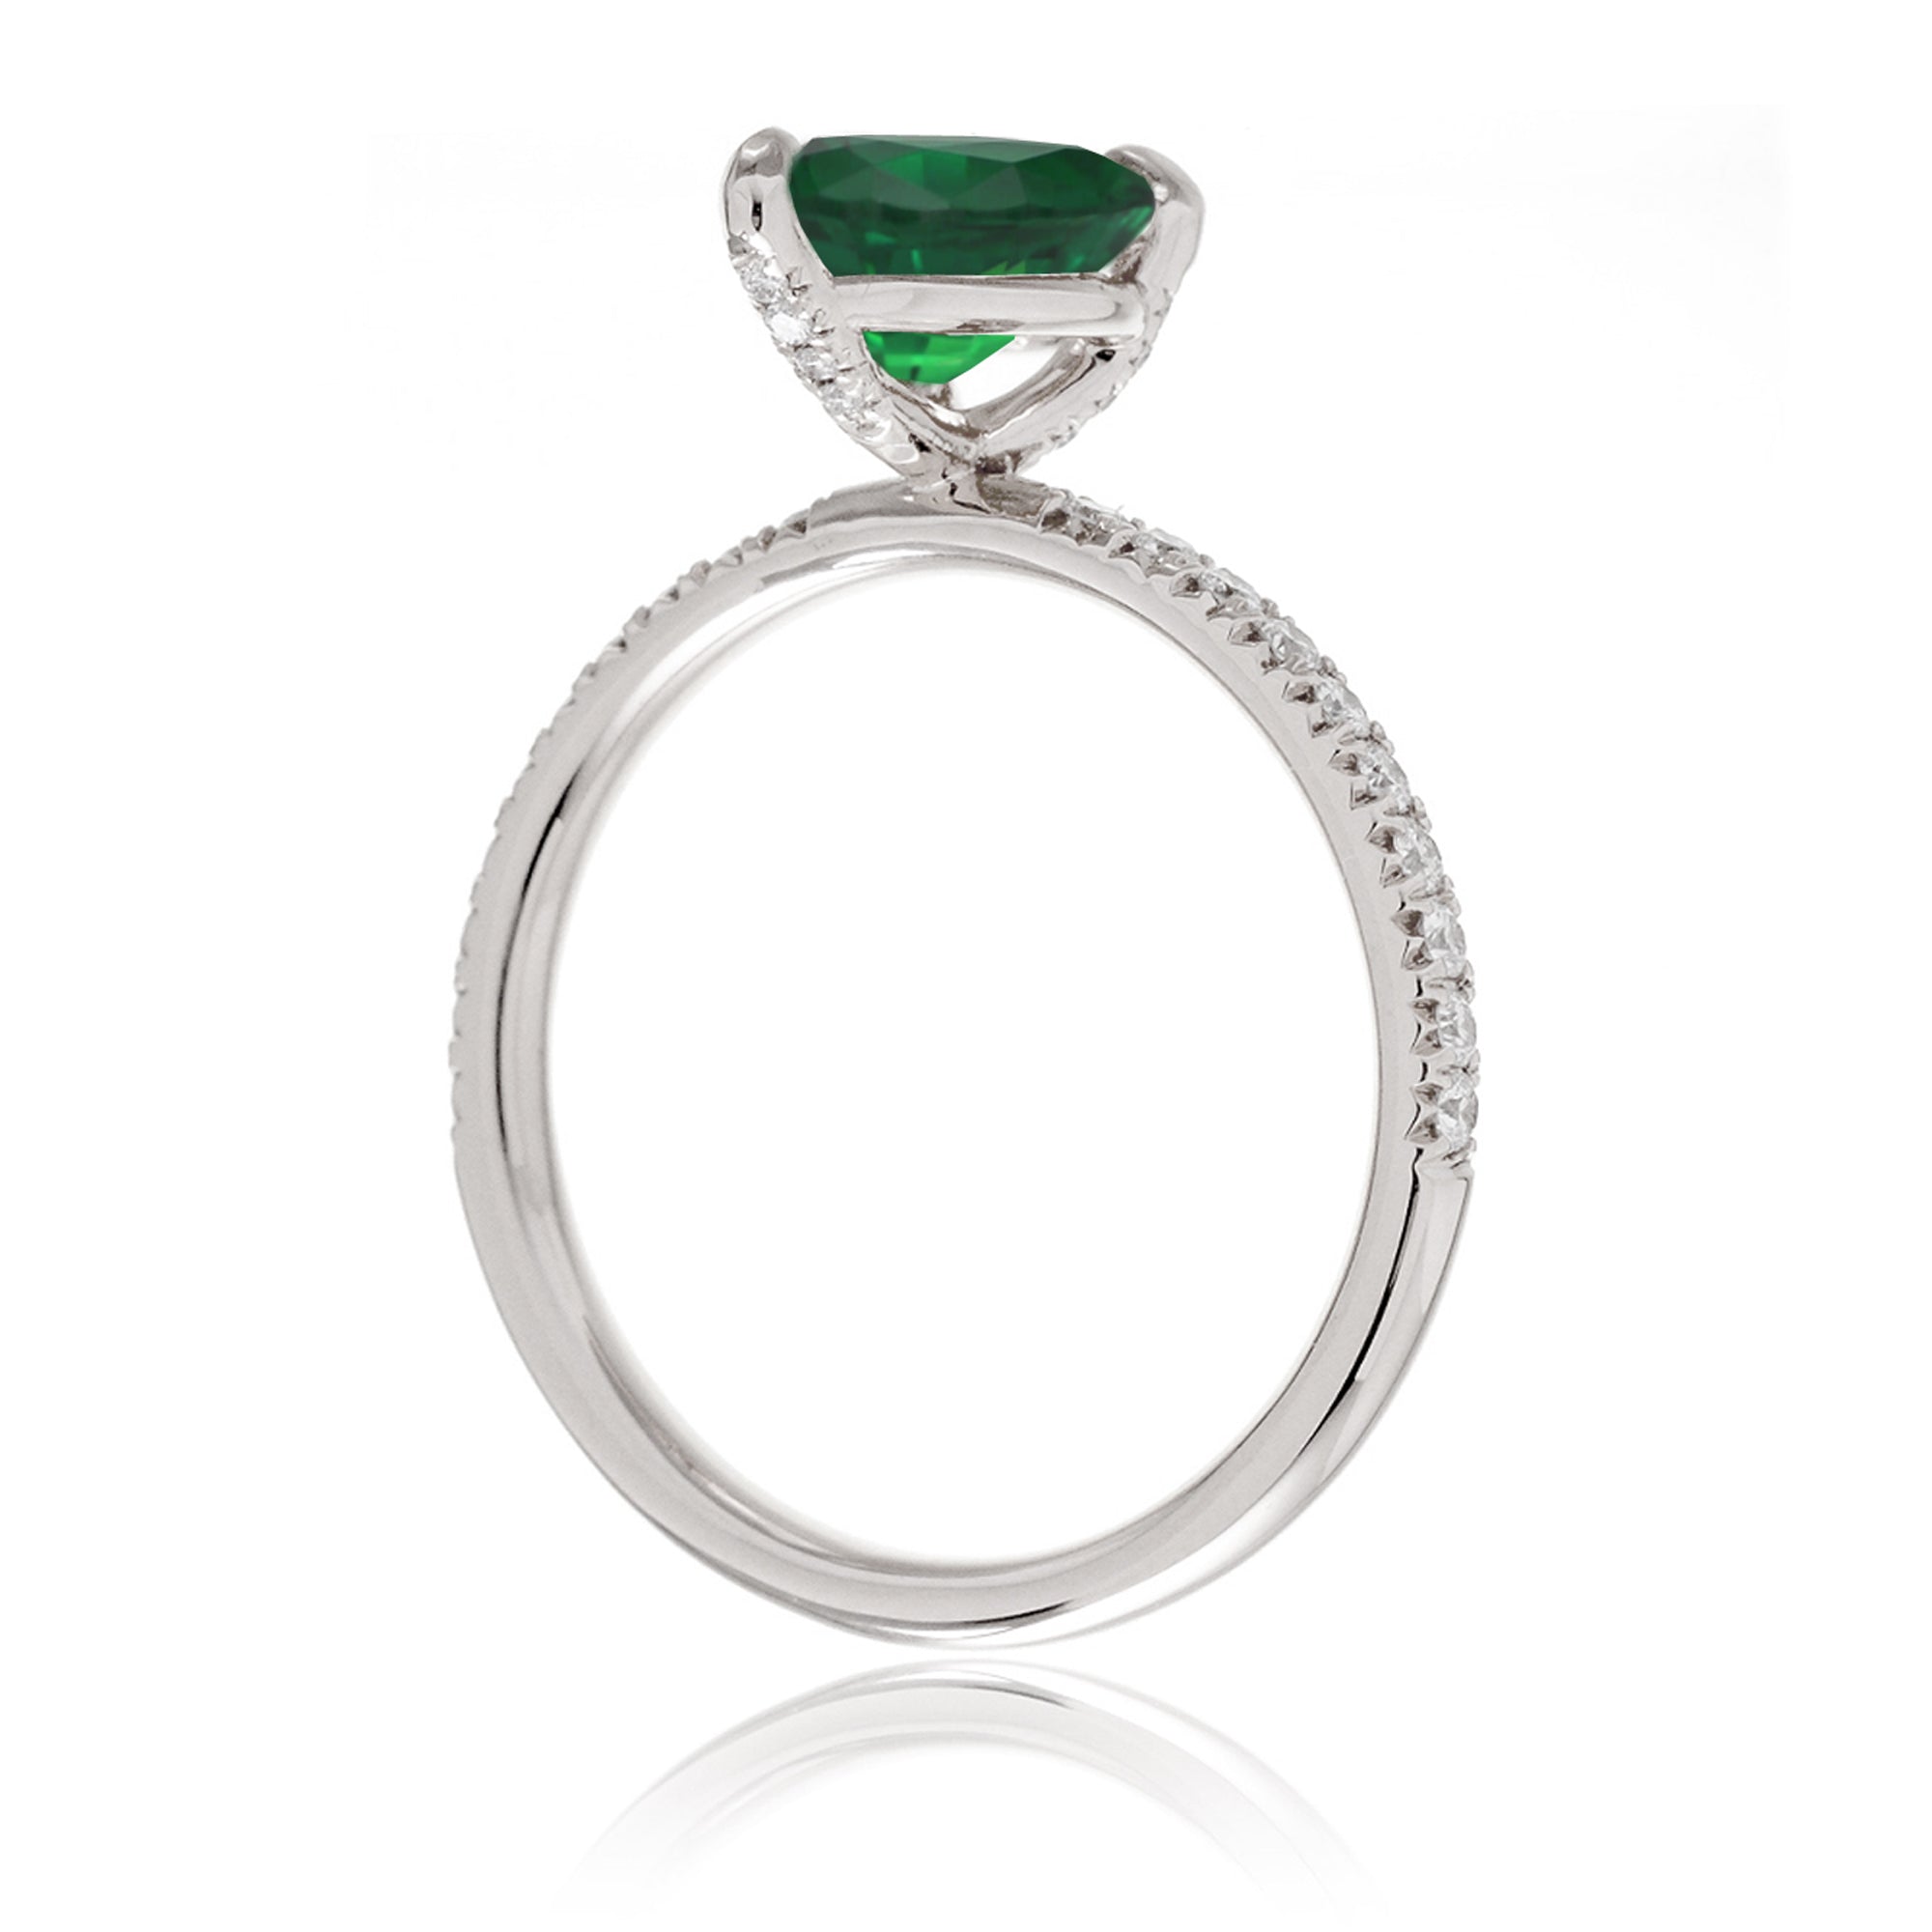 Pear green emerald diamond band engagement ring white gold - the Ava